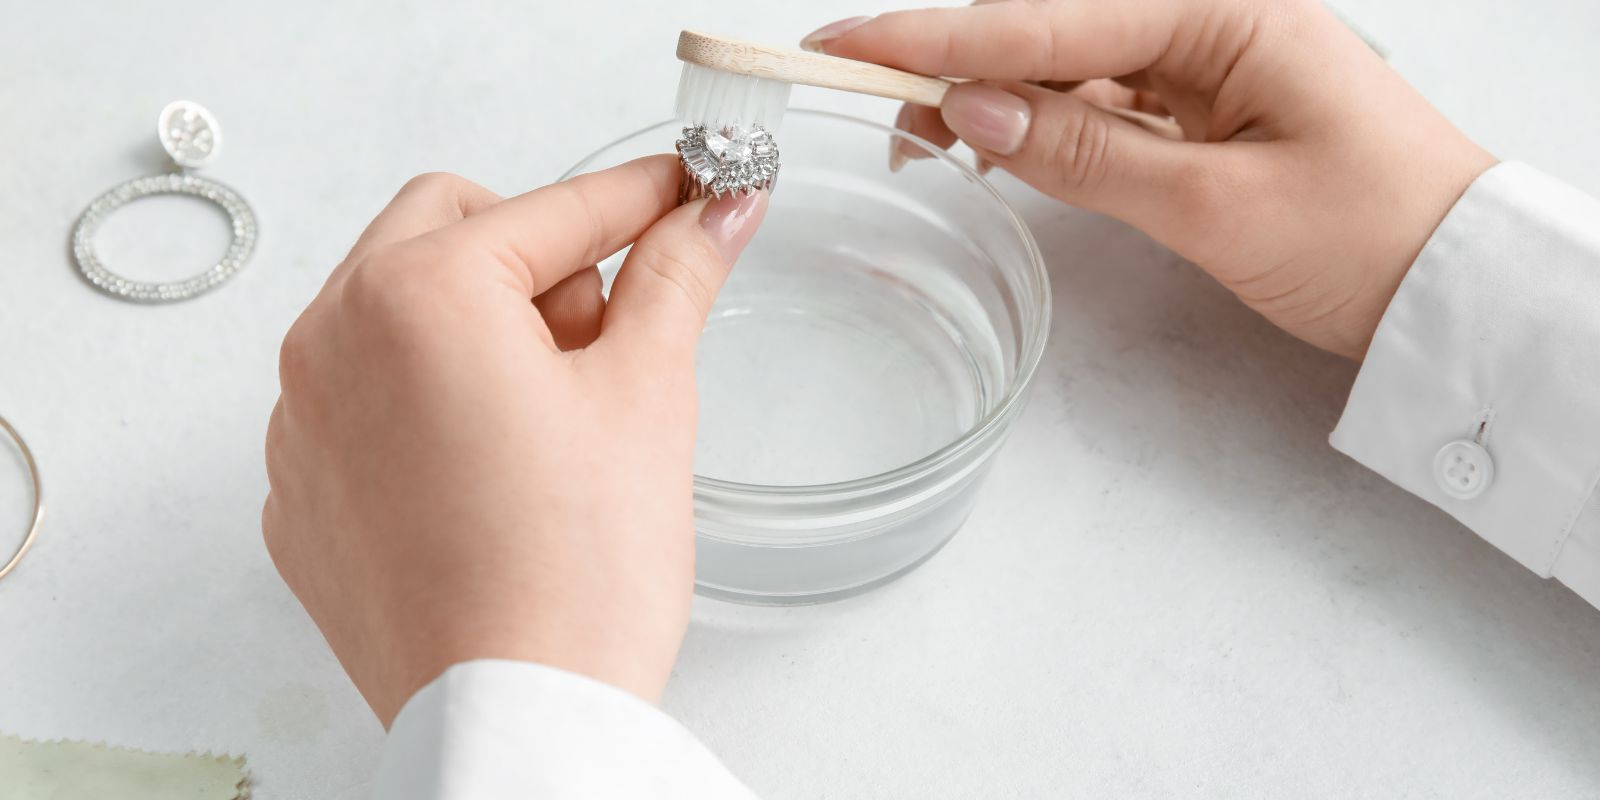 How to Clean and Care for Your Diamond Engagement Ring